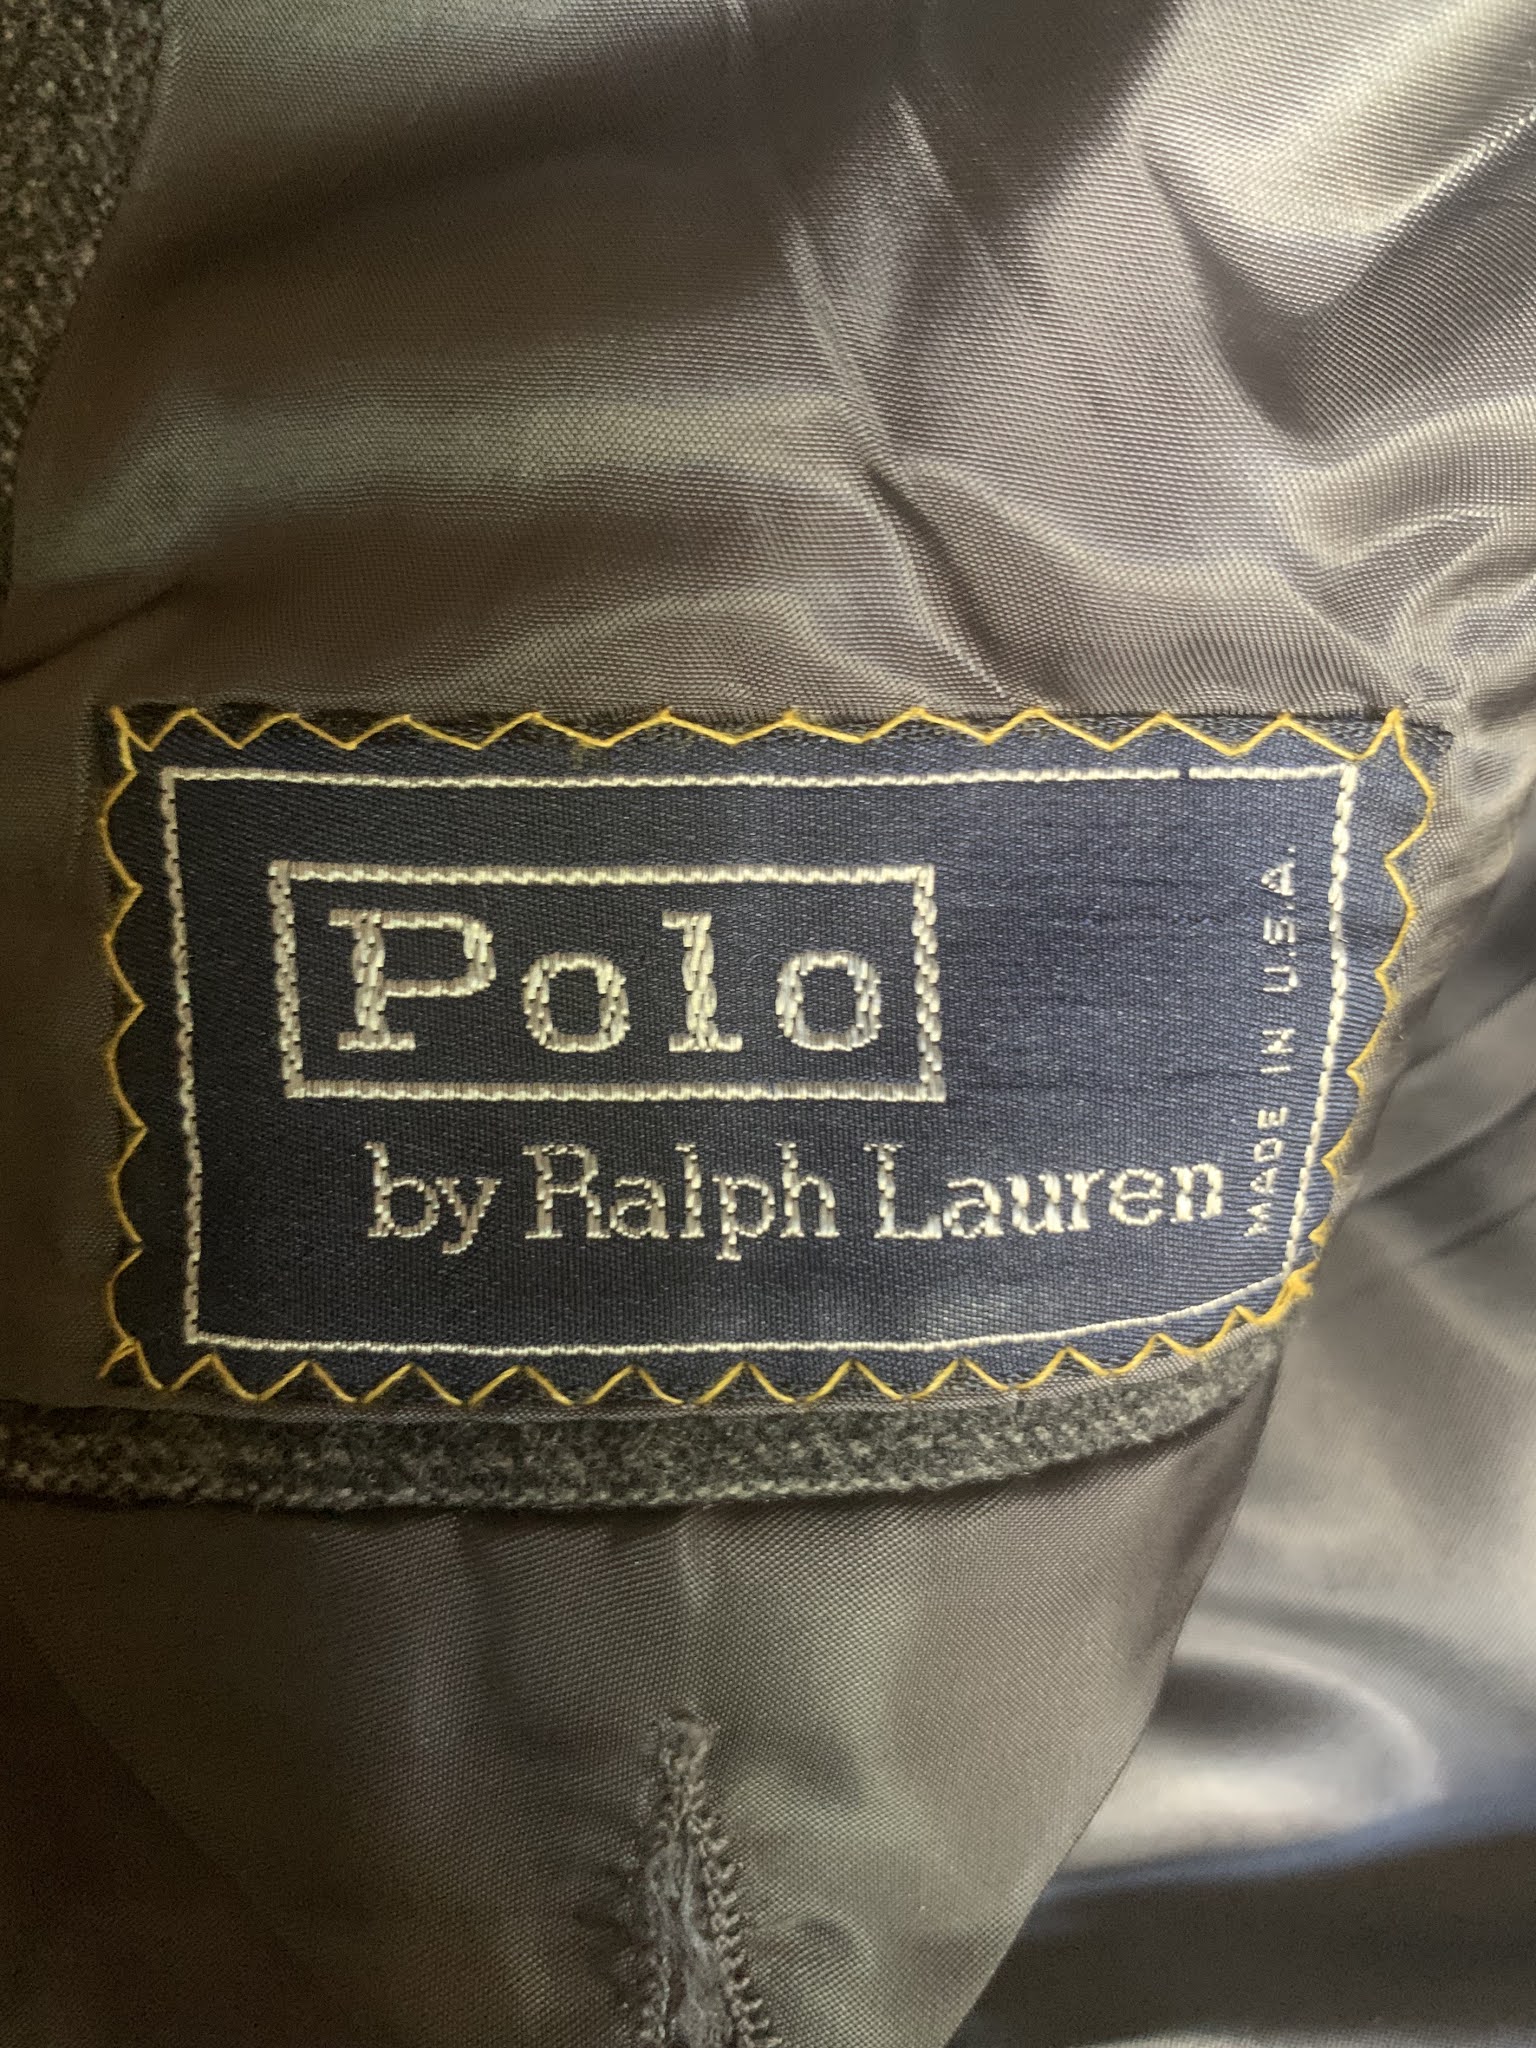 An Uptown Dandy: 1980s Does 1930s: The Vintage Polo Ralph Lauren Double ...